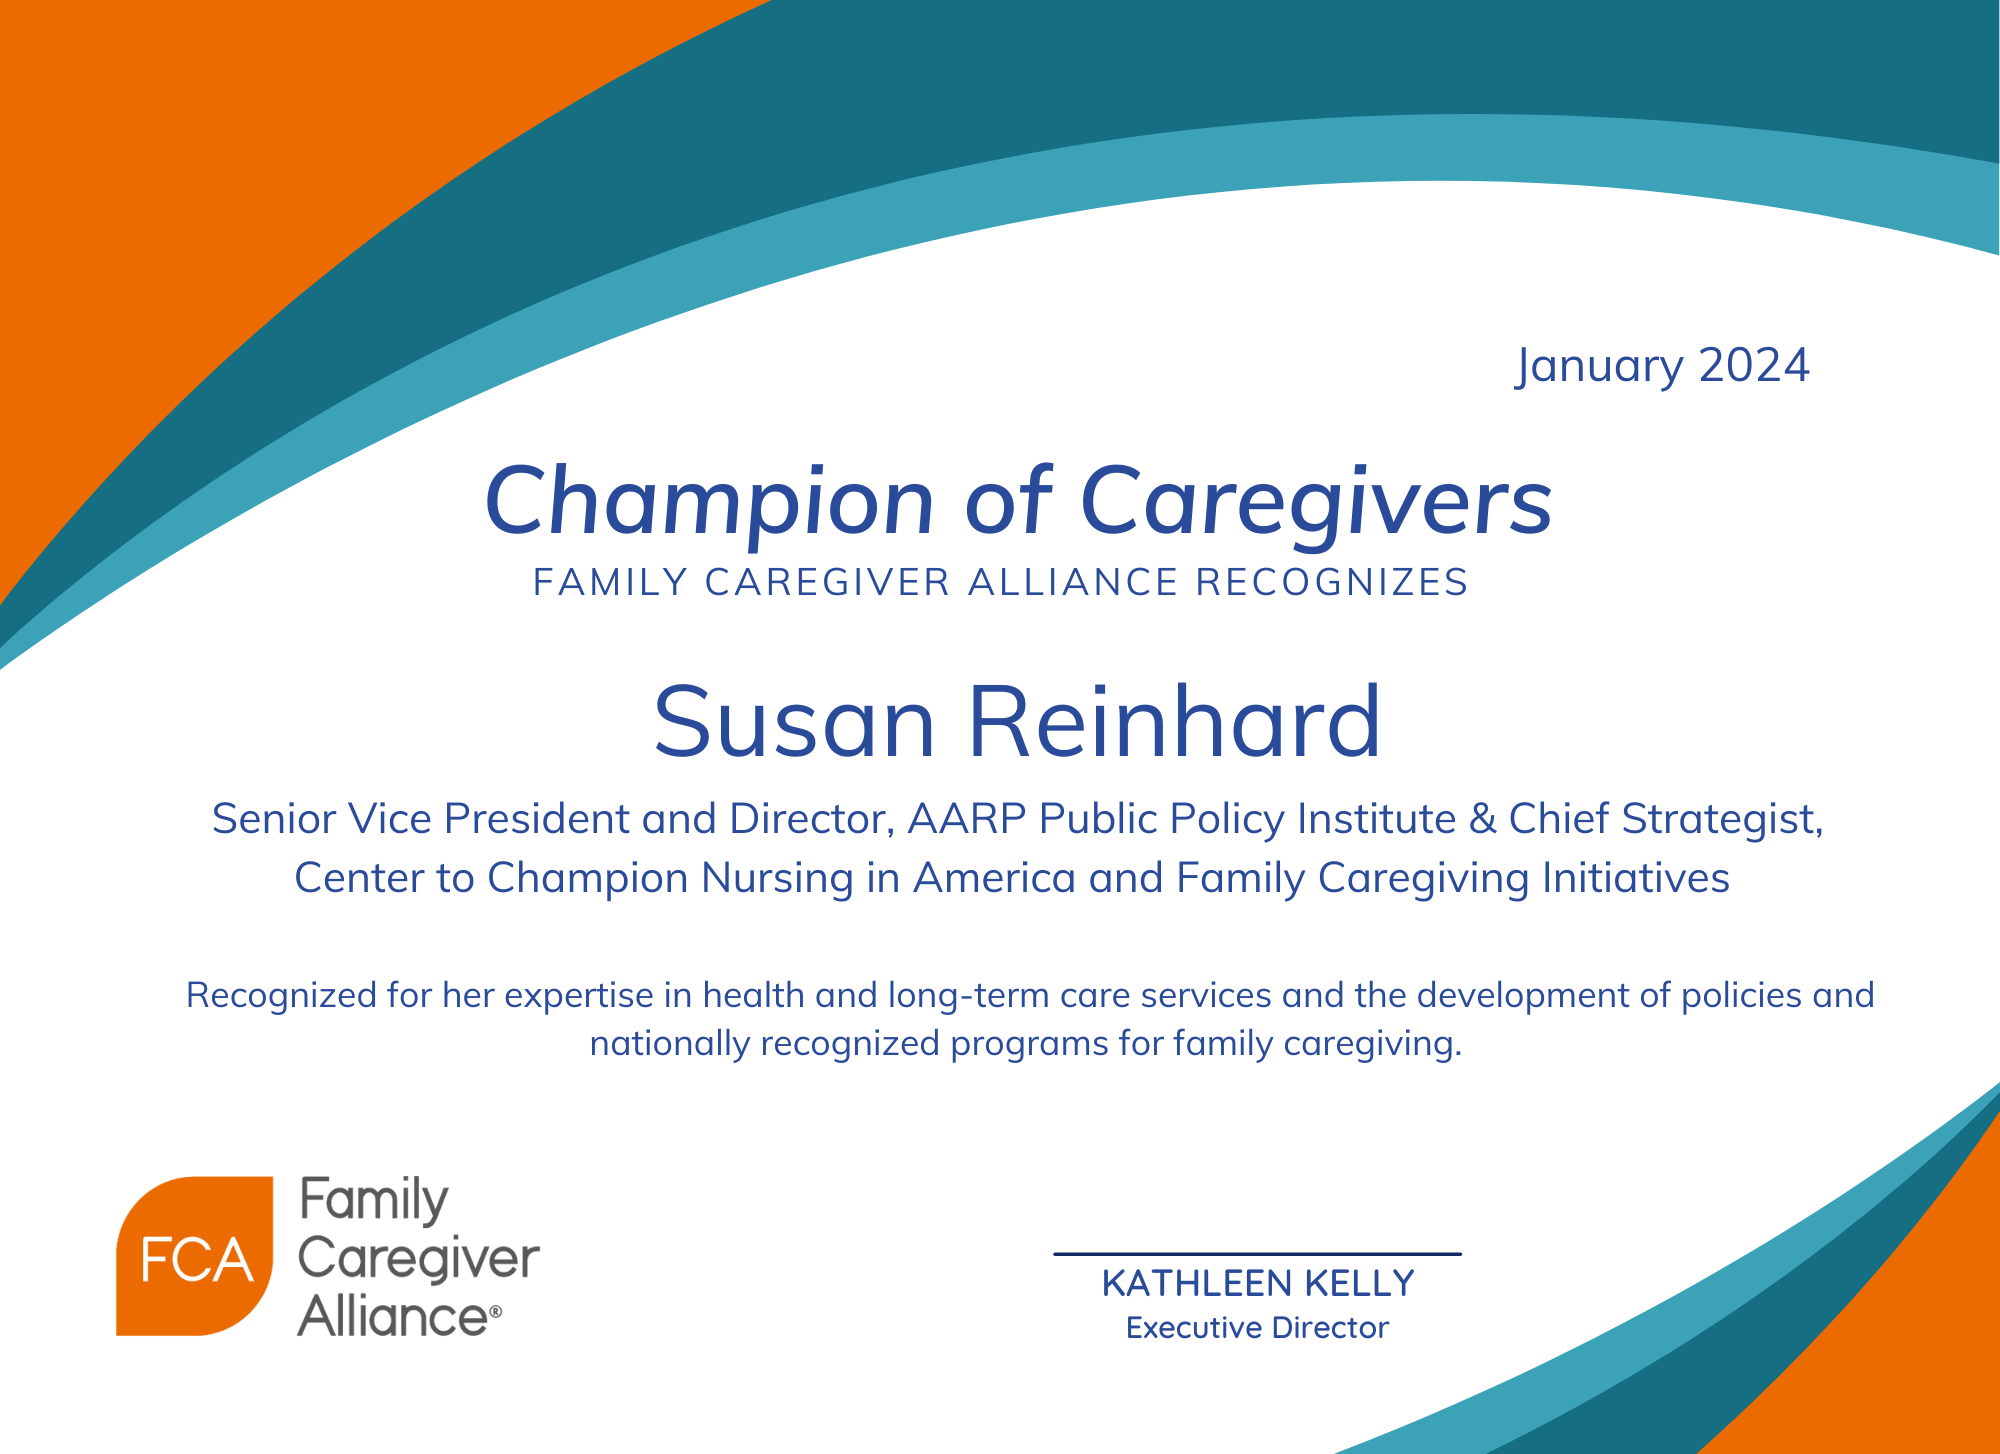 Champions of Caregivers 2023 certificate for Susan Reinhard